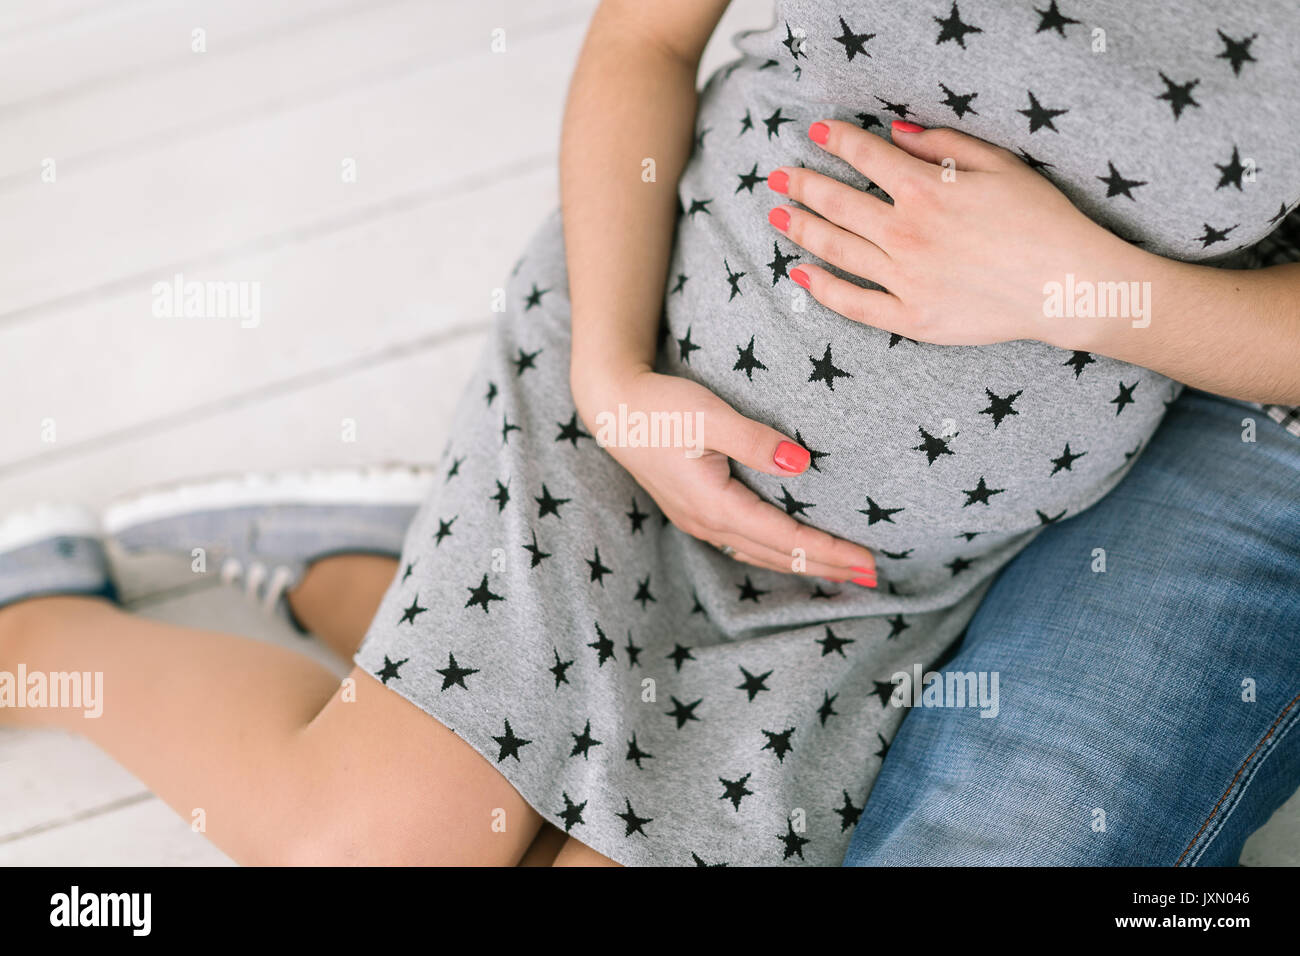 Woman Stomach Love Stock Photos & Woman Stomach Love Stock Images - Alamy